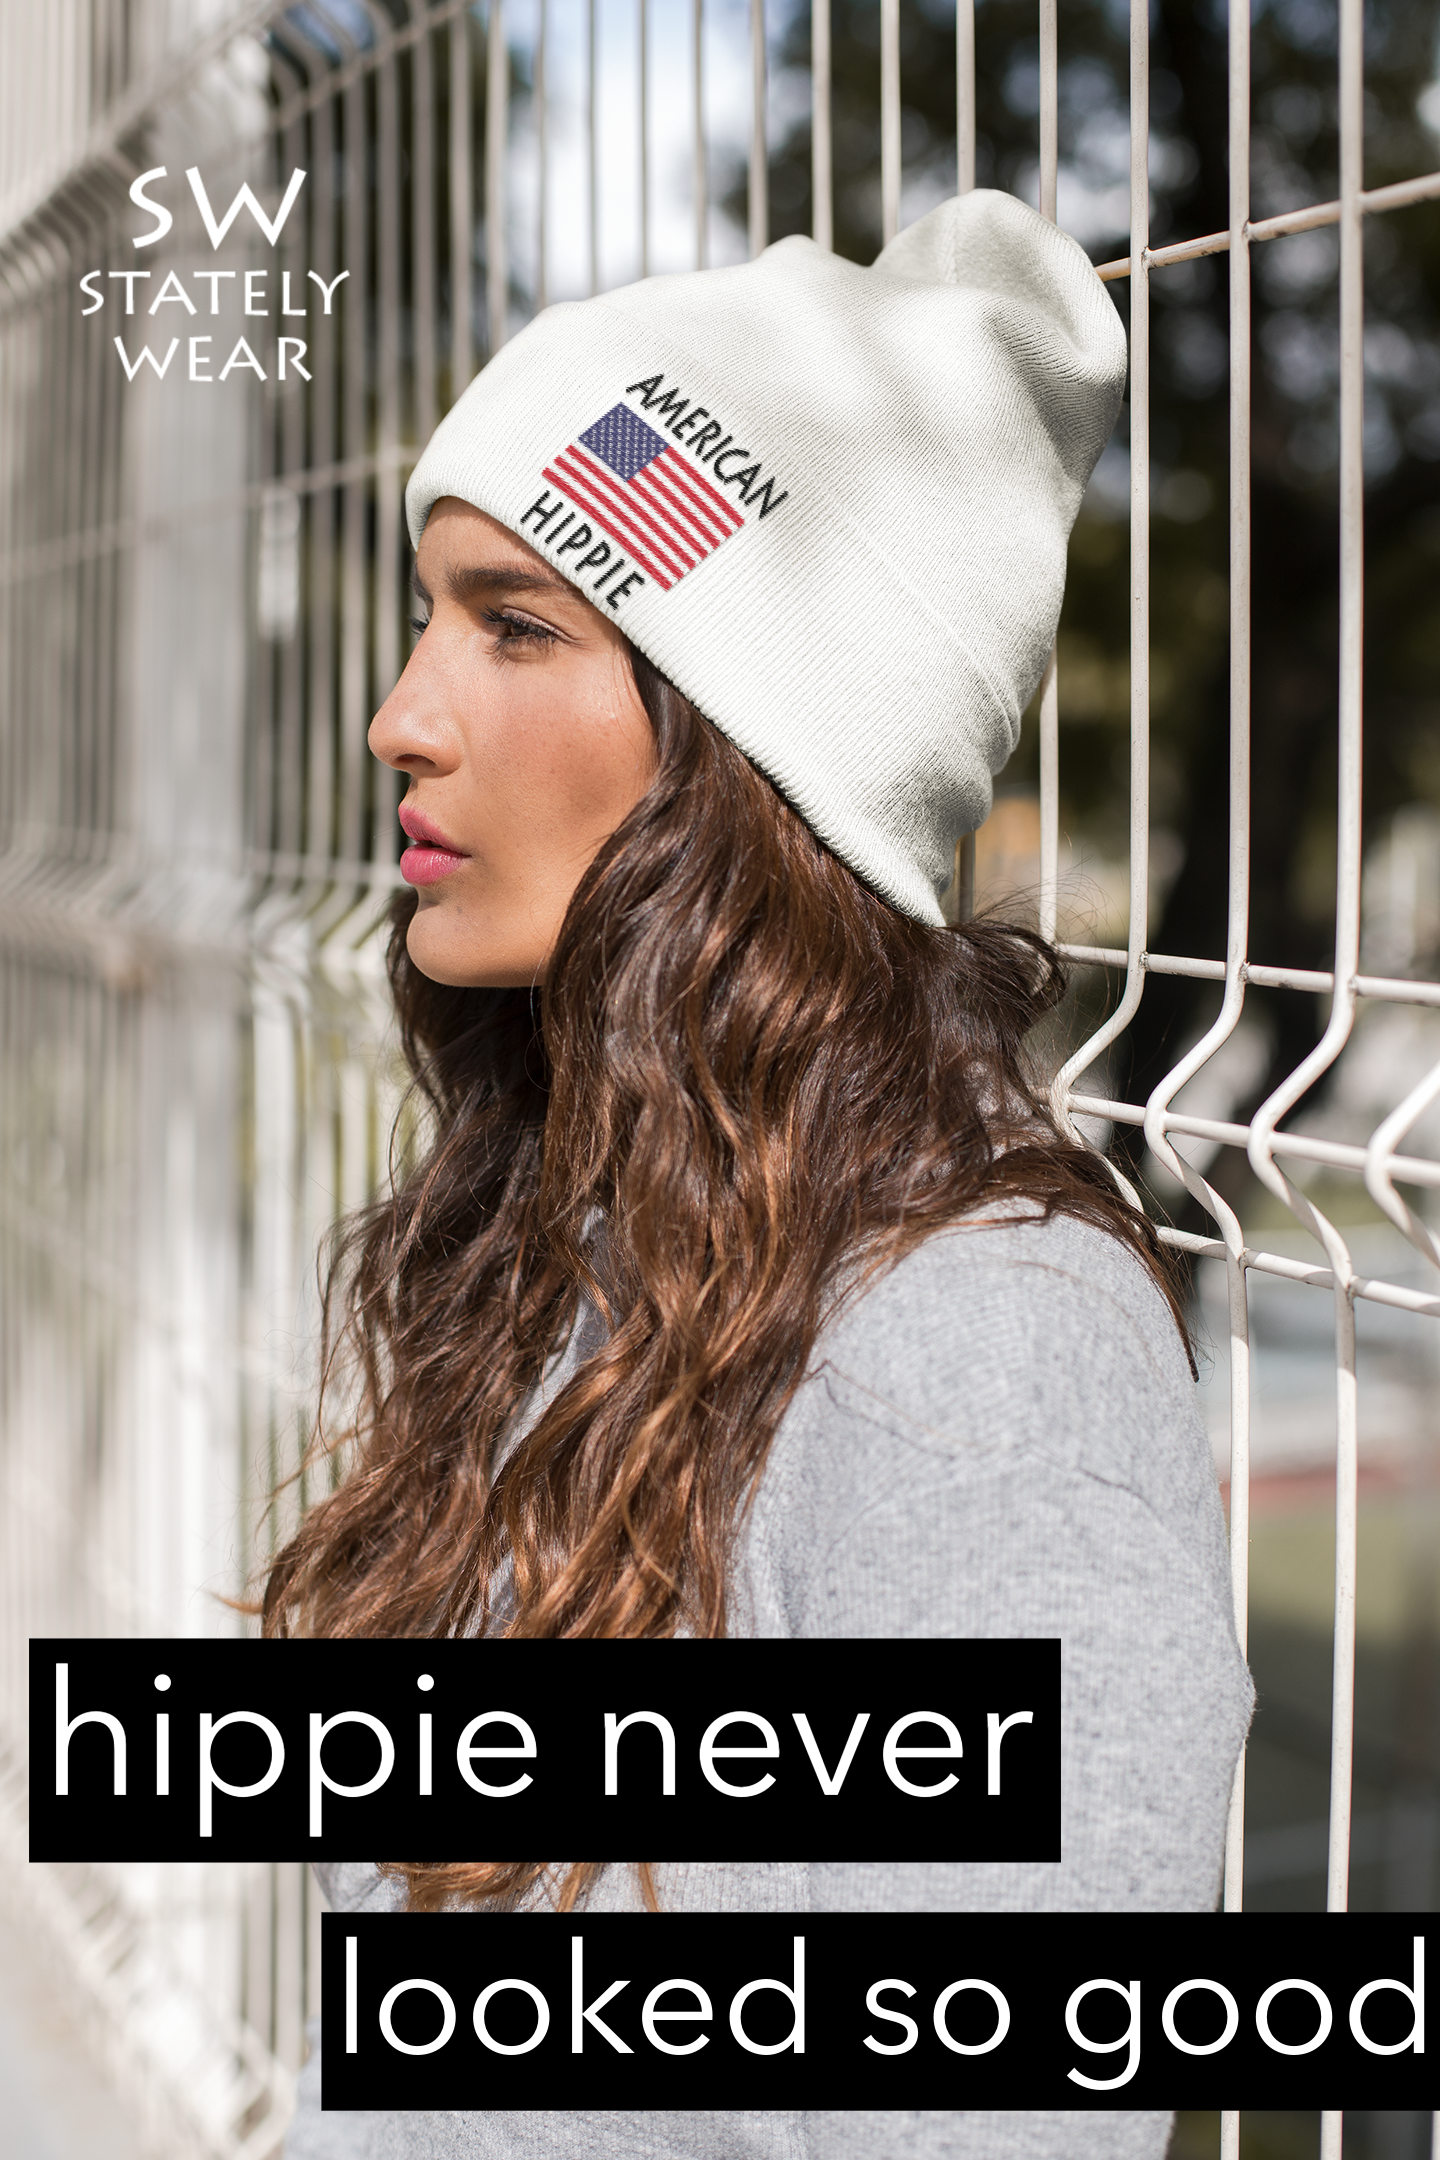 a great american flag beanie. this beanie will keep you warm and stylish. Stately Wear's flag hippie collection of hoodies, tees, leggings, duffels & totes are bestsellers.  Amazon besteller.